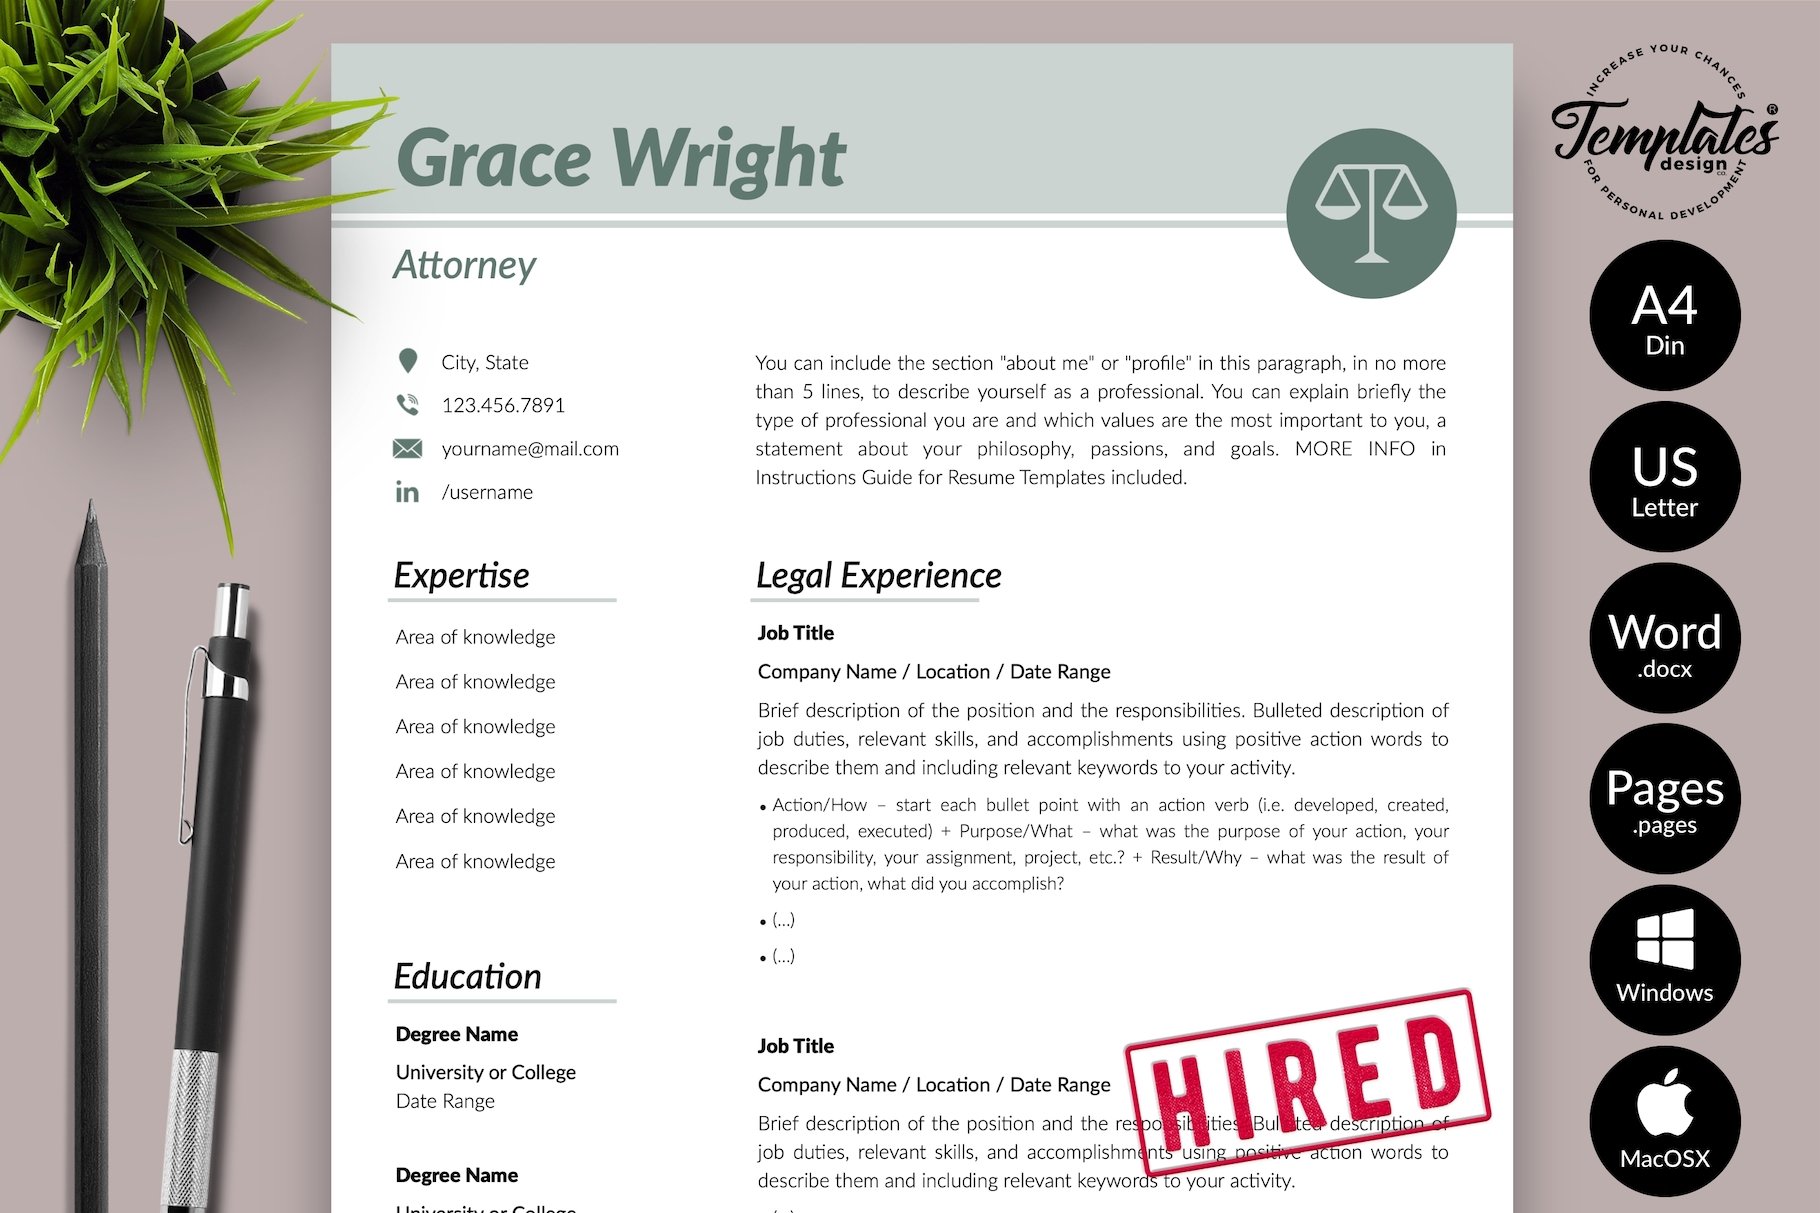 Attorney Resume Format / CV - Grace cover image.